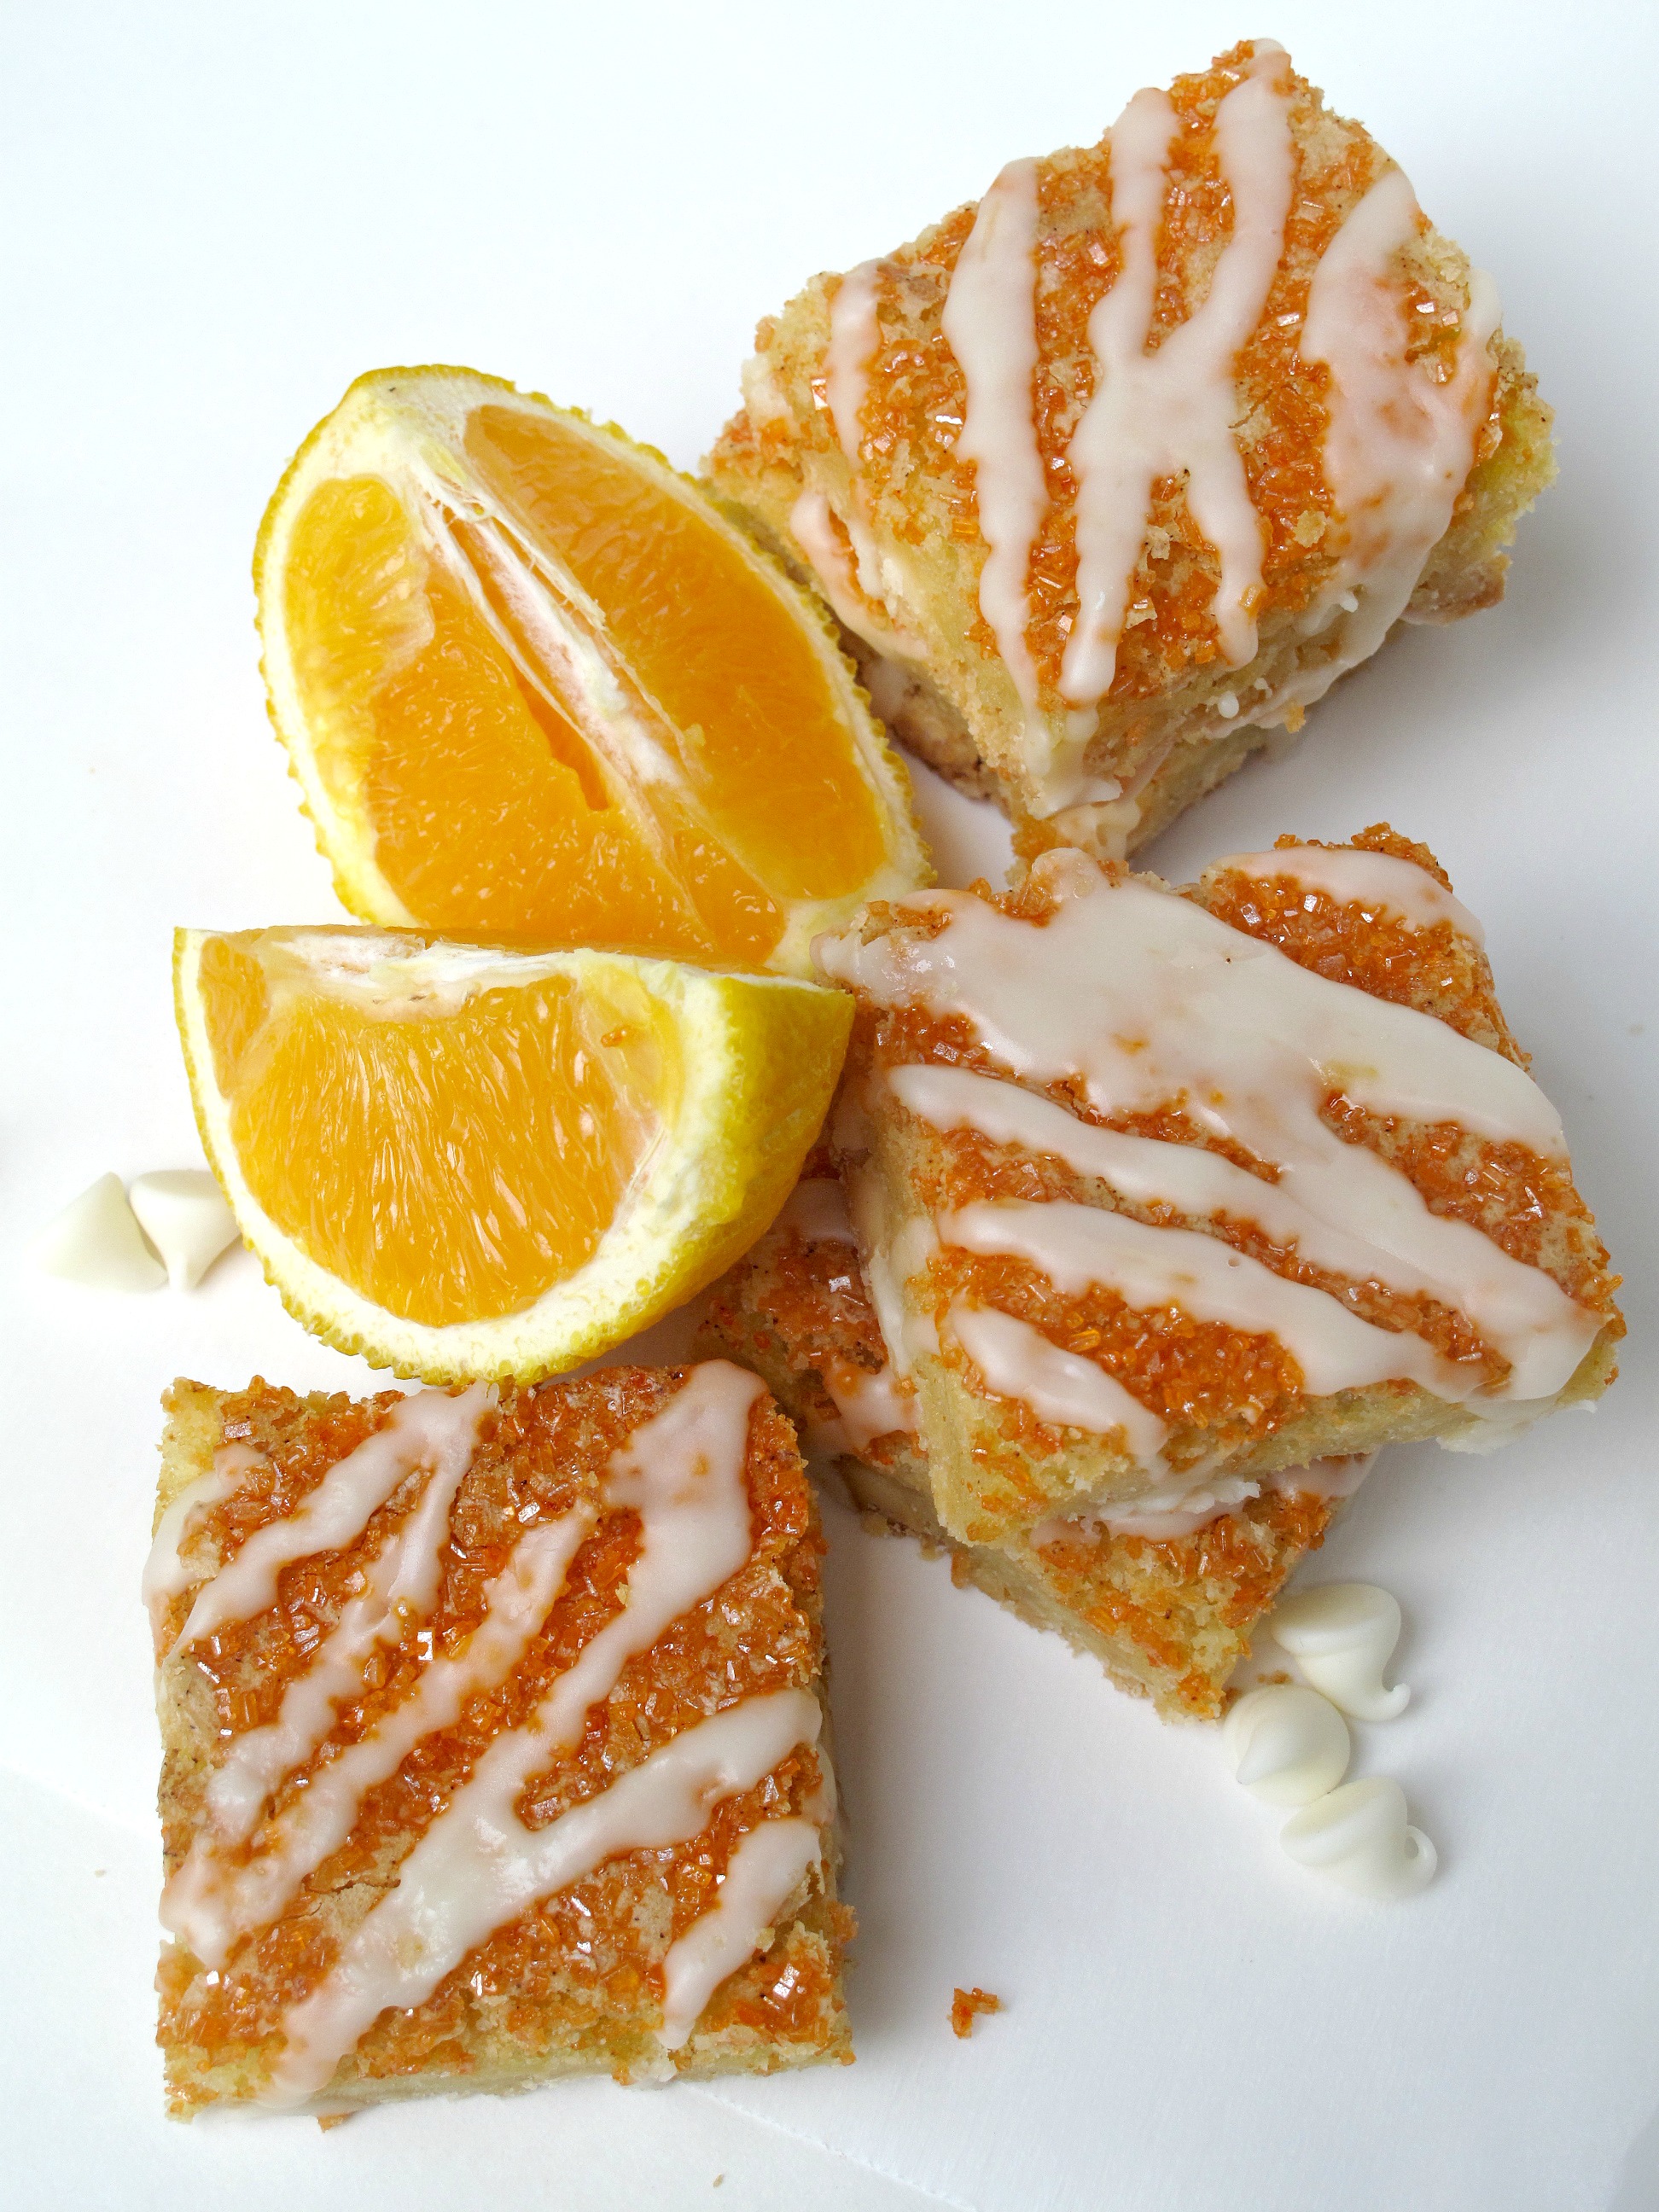 Orange Bars topped with orange sugar and icing zigzags with cut oranges.